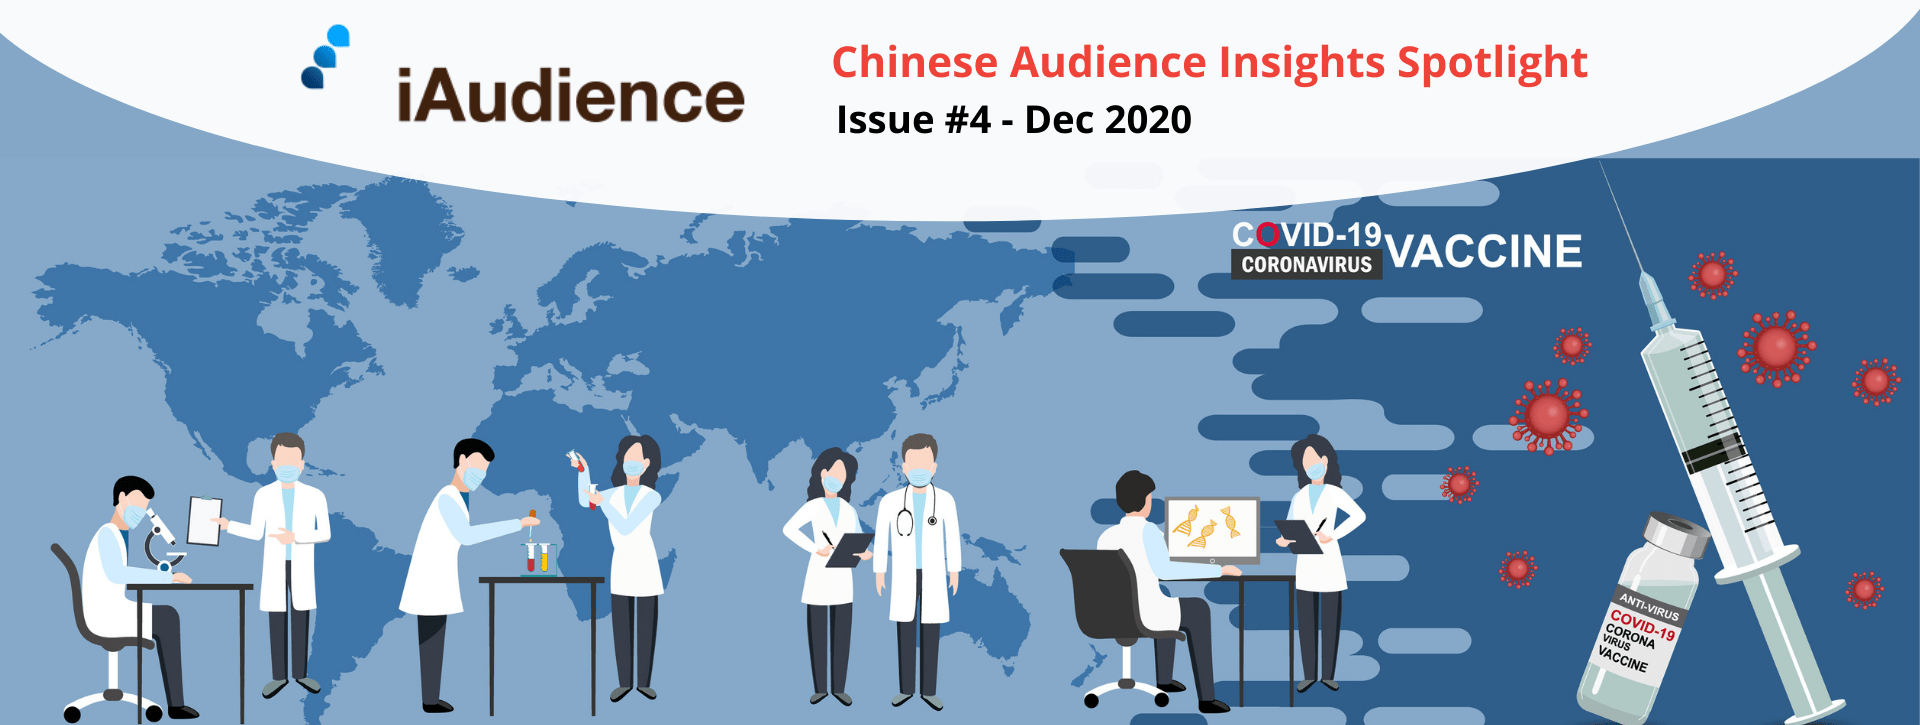 iAudience: Chinese Audiences Insights Spotlight Issue#4: COVID-19 Vaccine in the spotlight